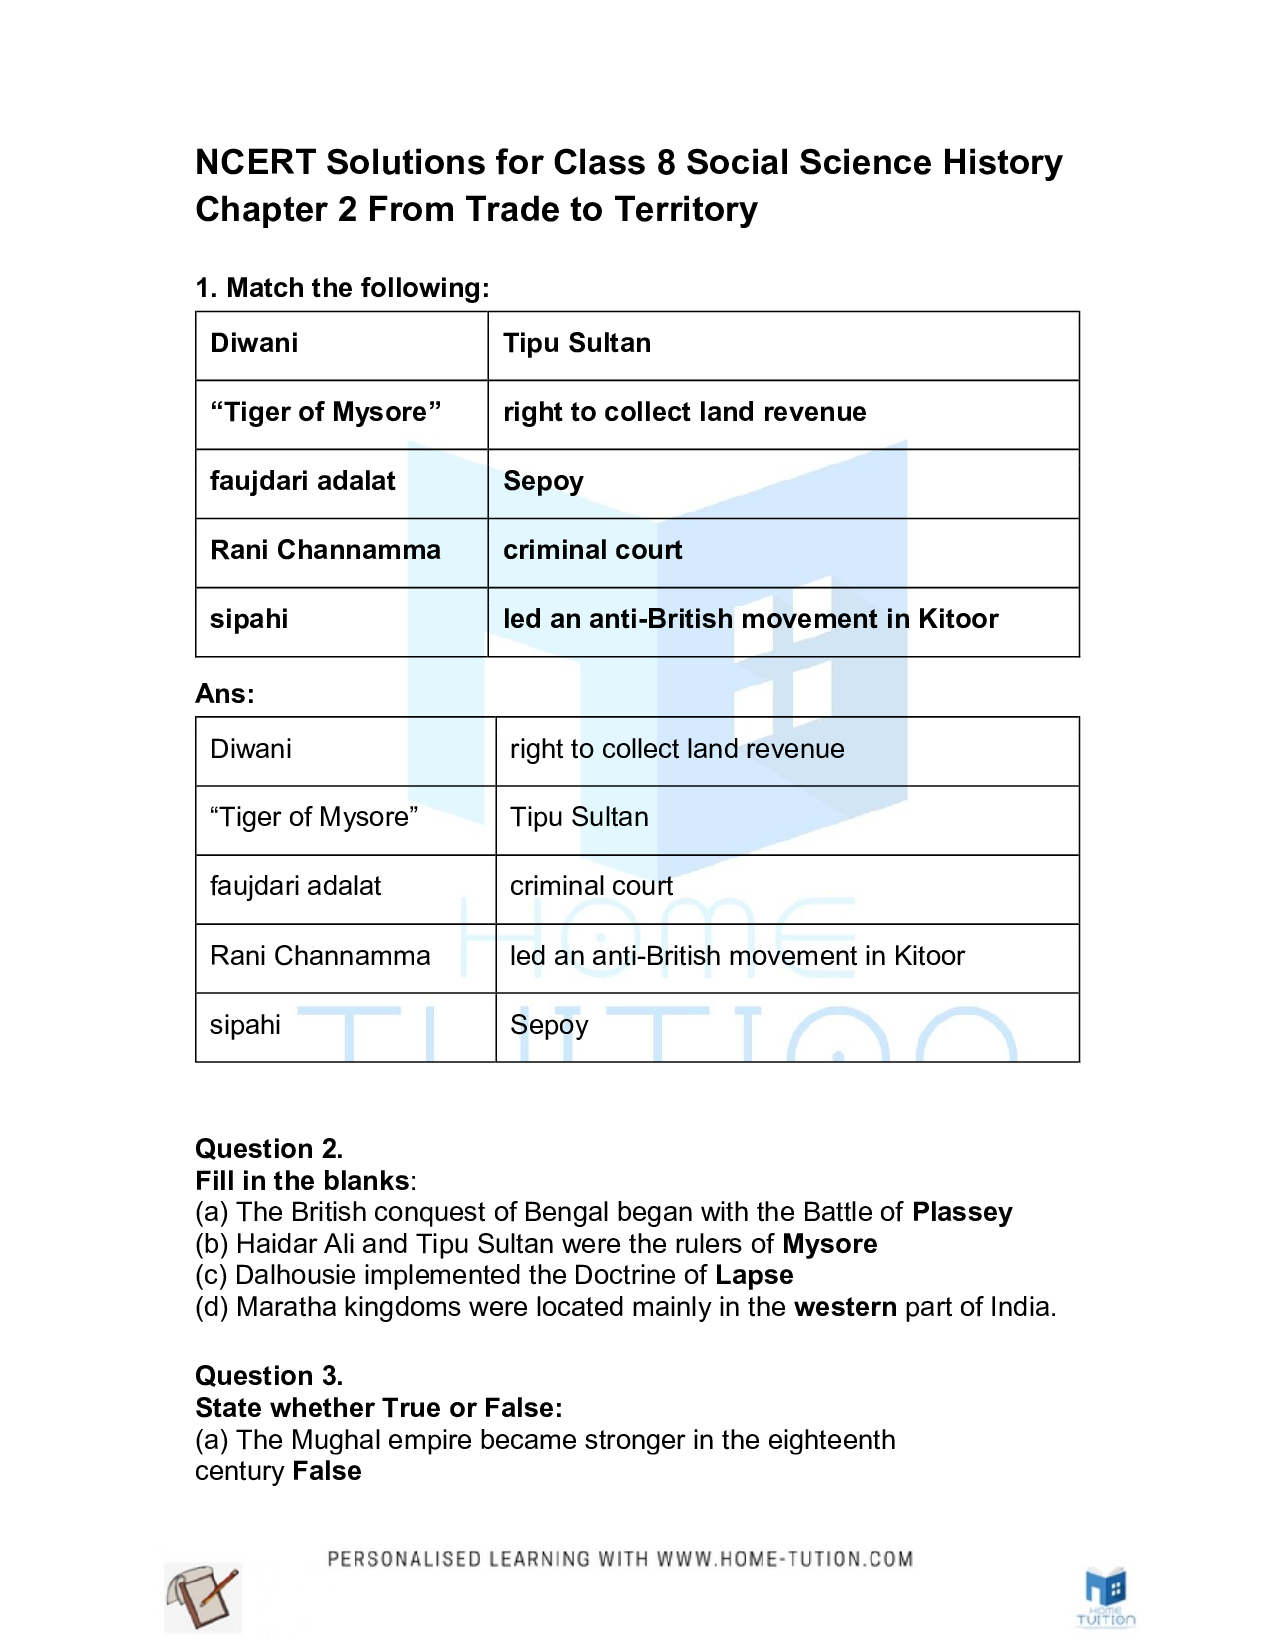 Chapter 2 – From Trade to Territory the Company Establishes Power